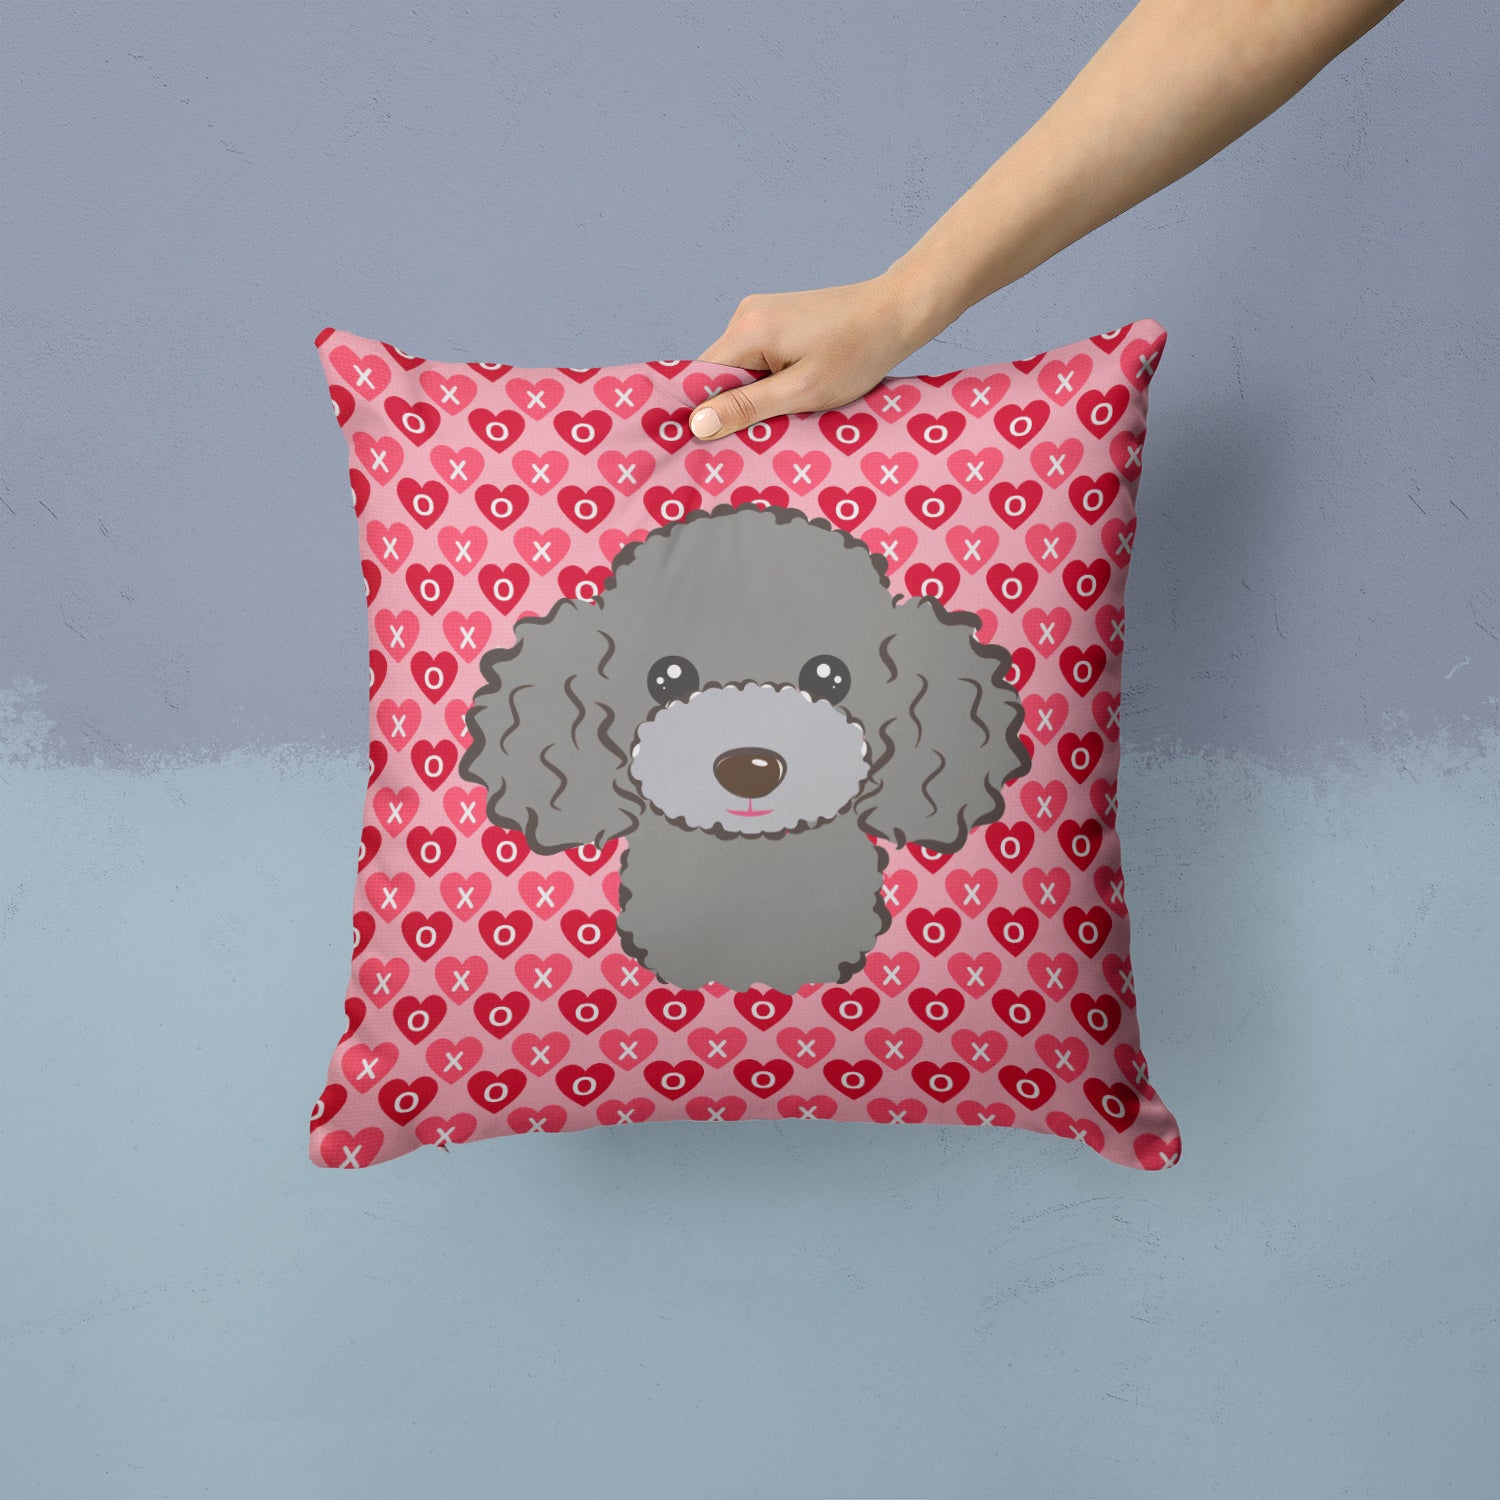 Silver Gray Poodle Hearts Fabric Decorative Pillow BB5329PW1414 - the-store.com